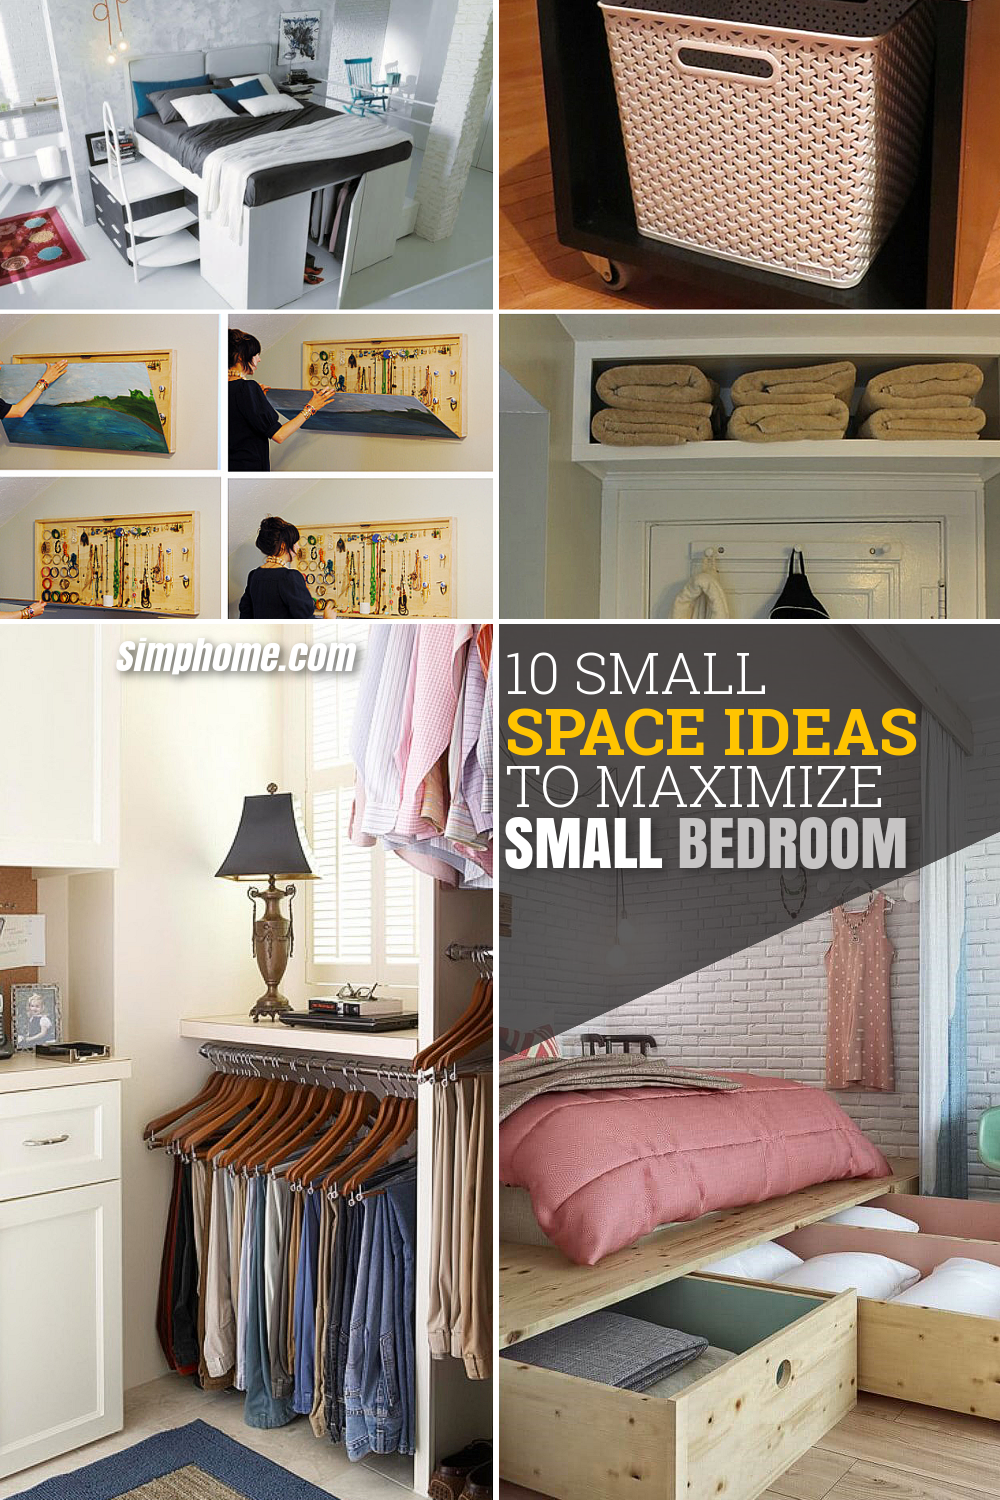 10 Small Space Ideas to Maximize Small Bedroom via Simphome long pinterest